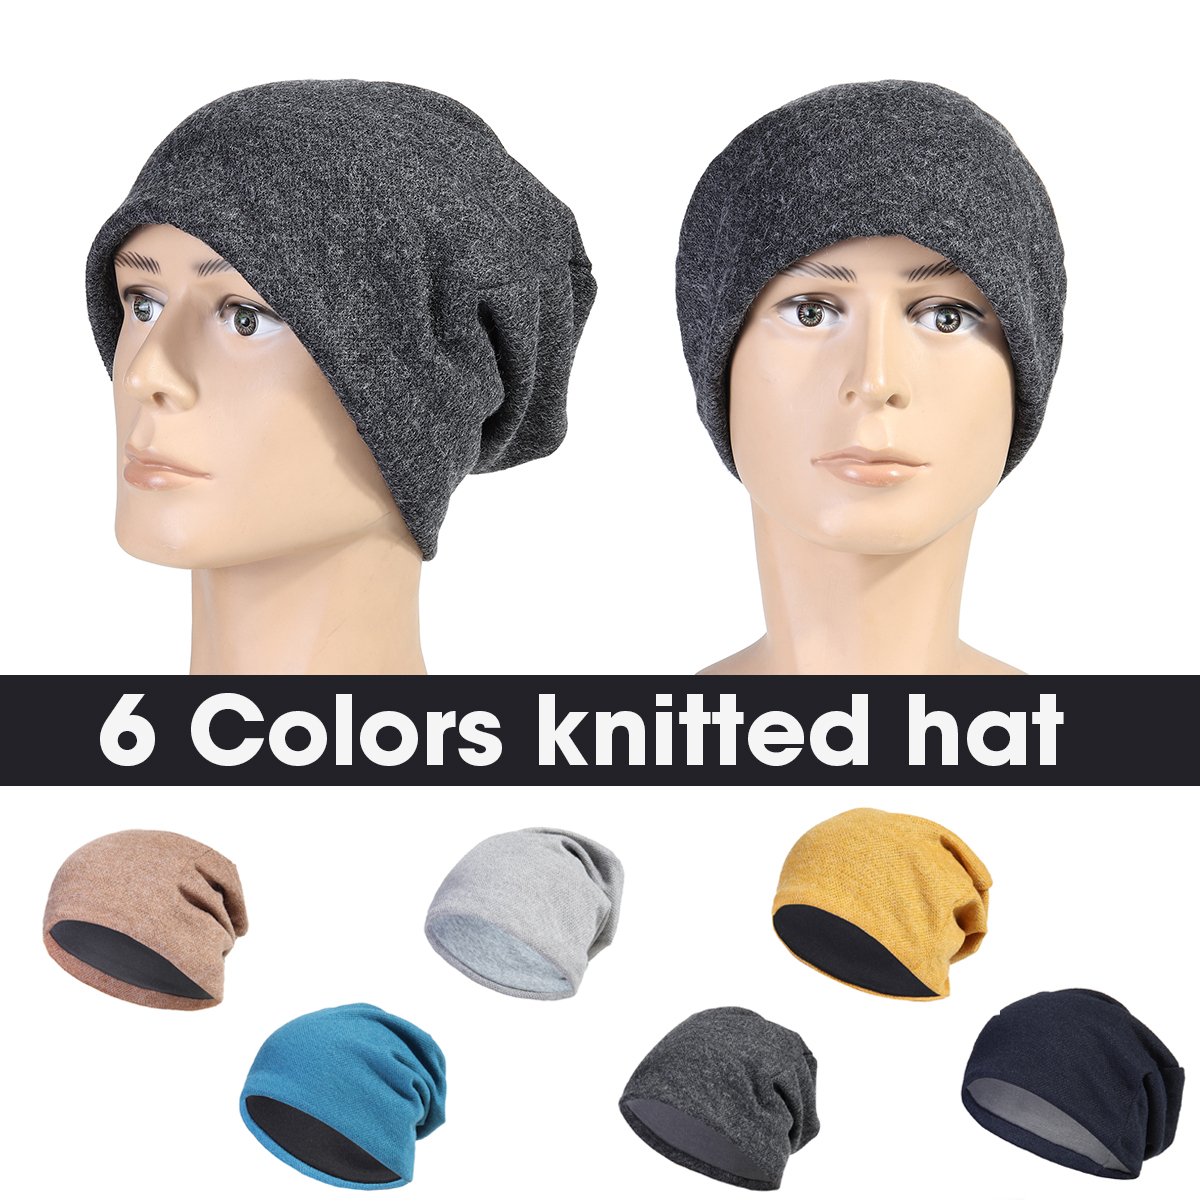 Knitted-Hat-Cotton-Winter-Ski-Running-Hunting-Cycling-Warm-Cap-1628524-1